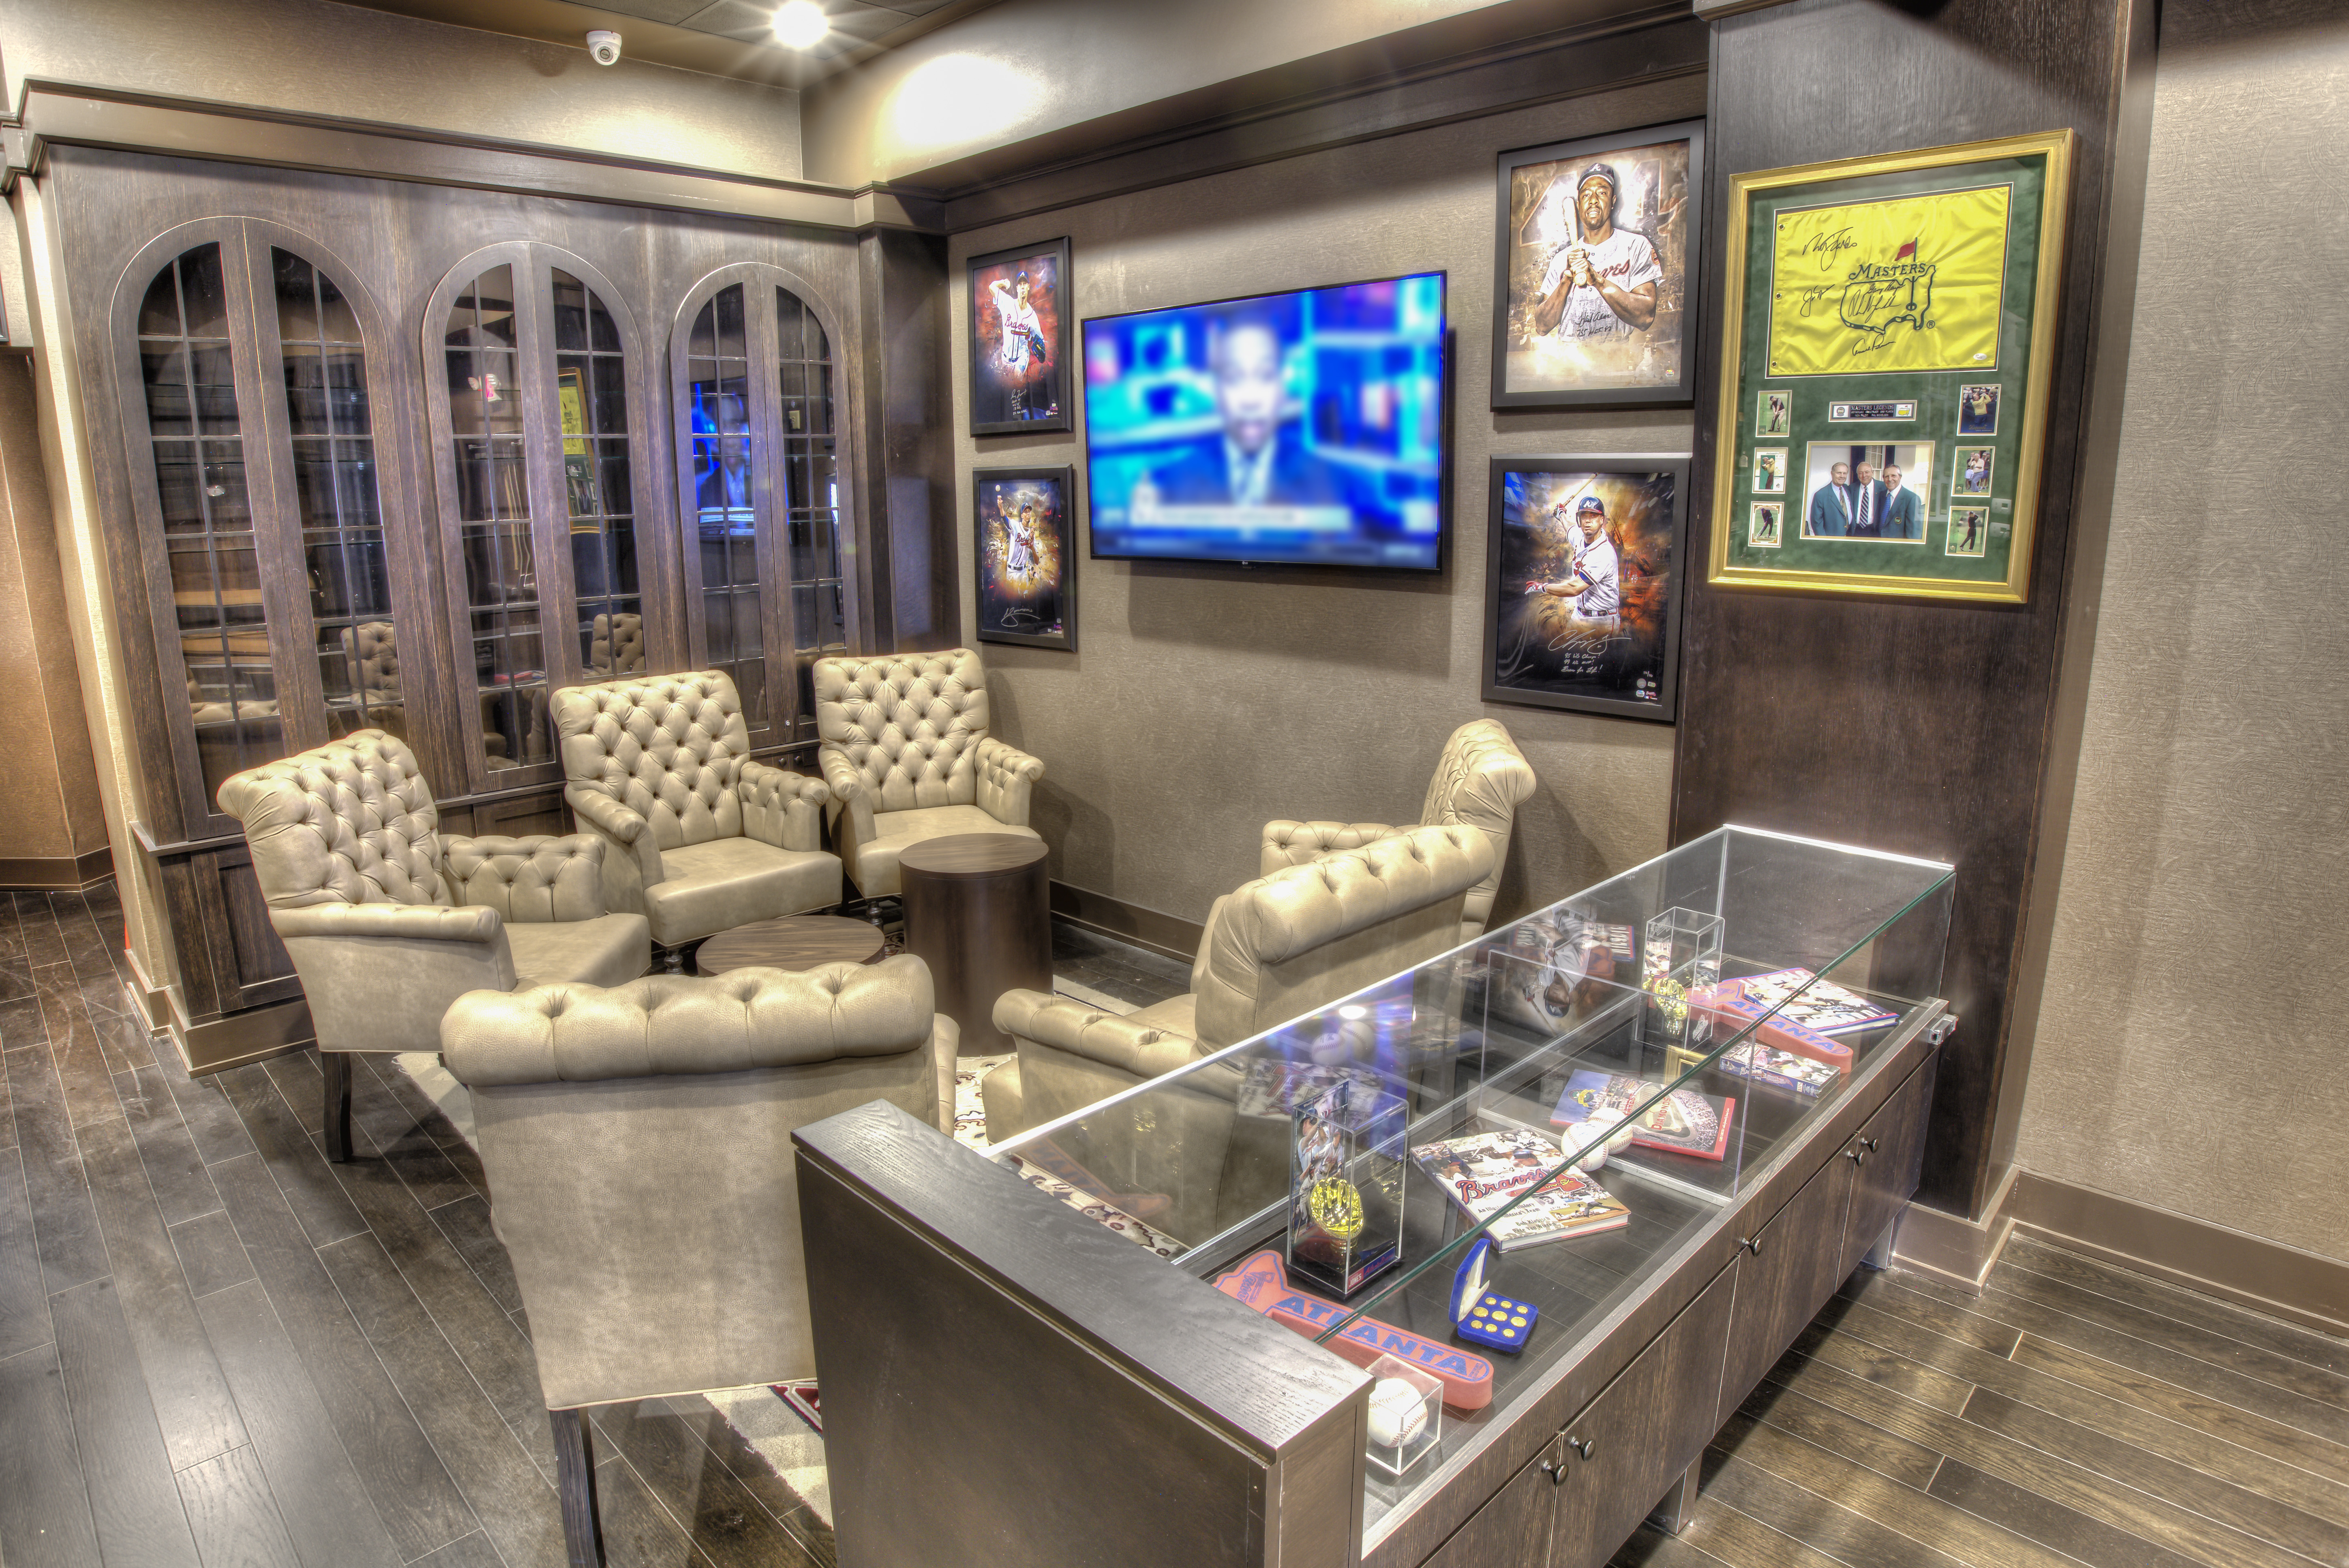 Lounge Seating, Sports Memorabilia, and TV in Brightly Lit Gamer Changer Bar